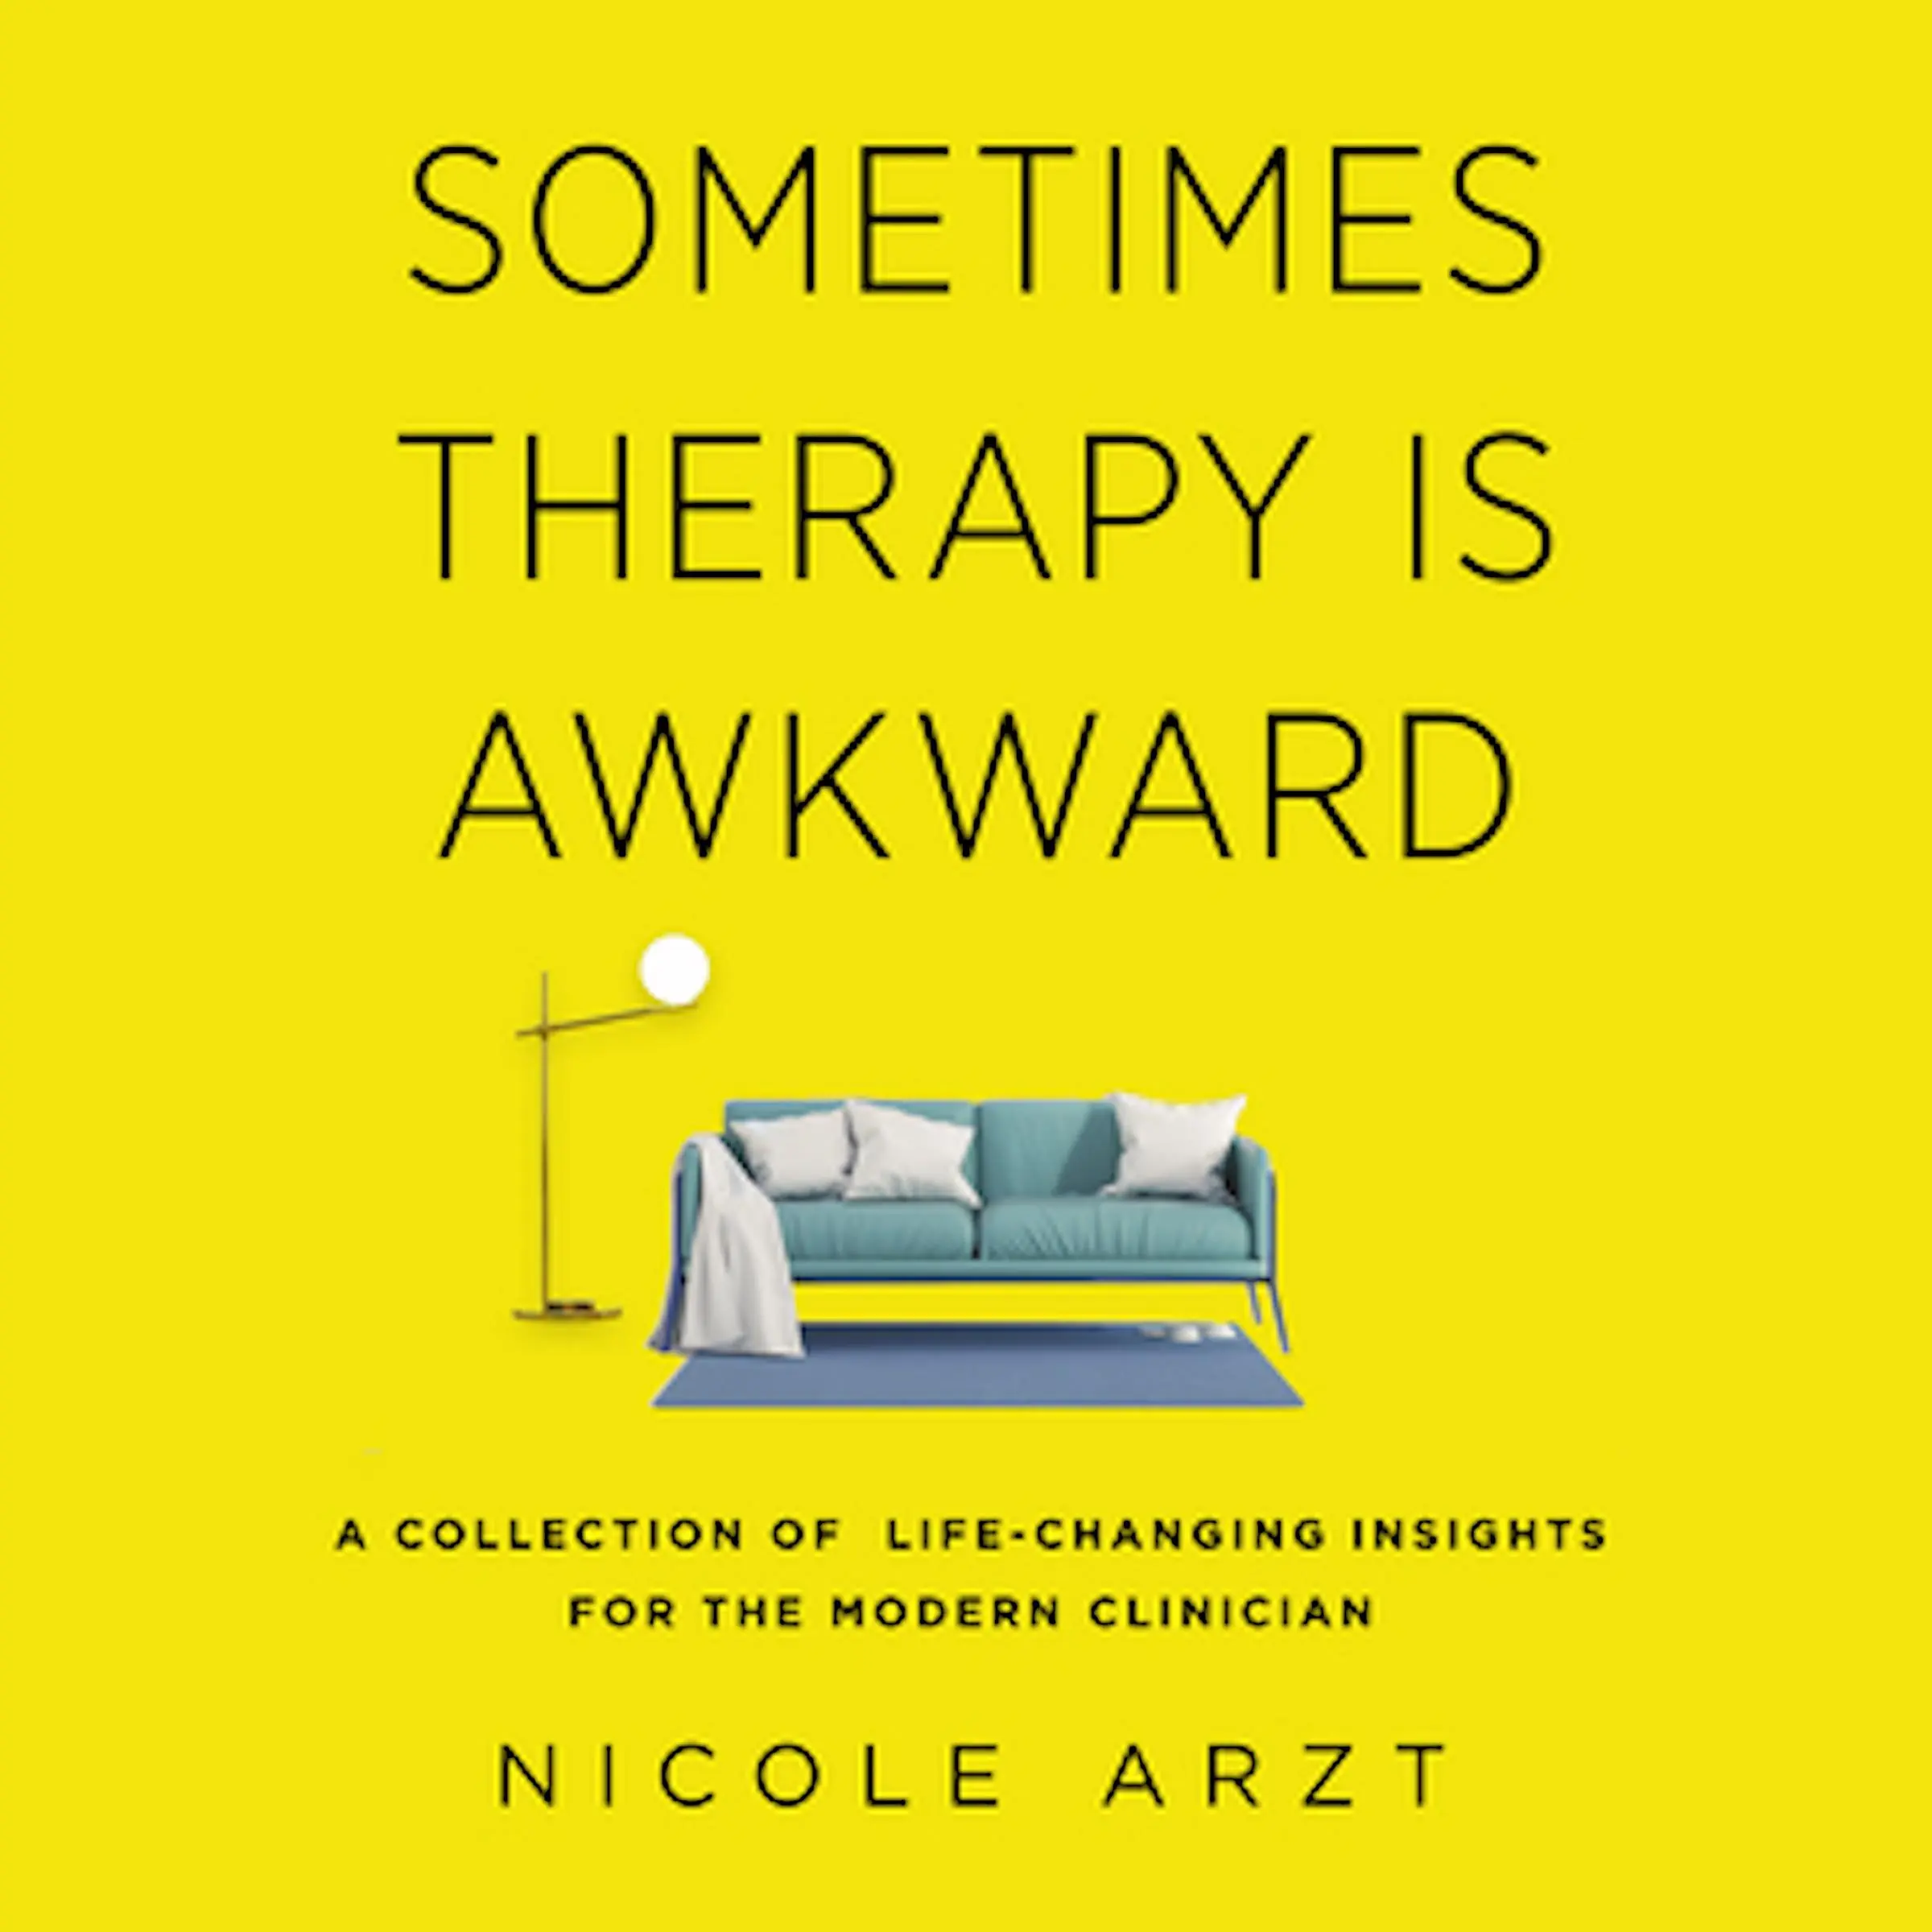 Sometimes Therapy Is Awkward by Nicole Arzt Audiobook